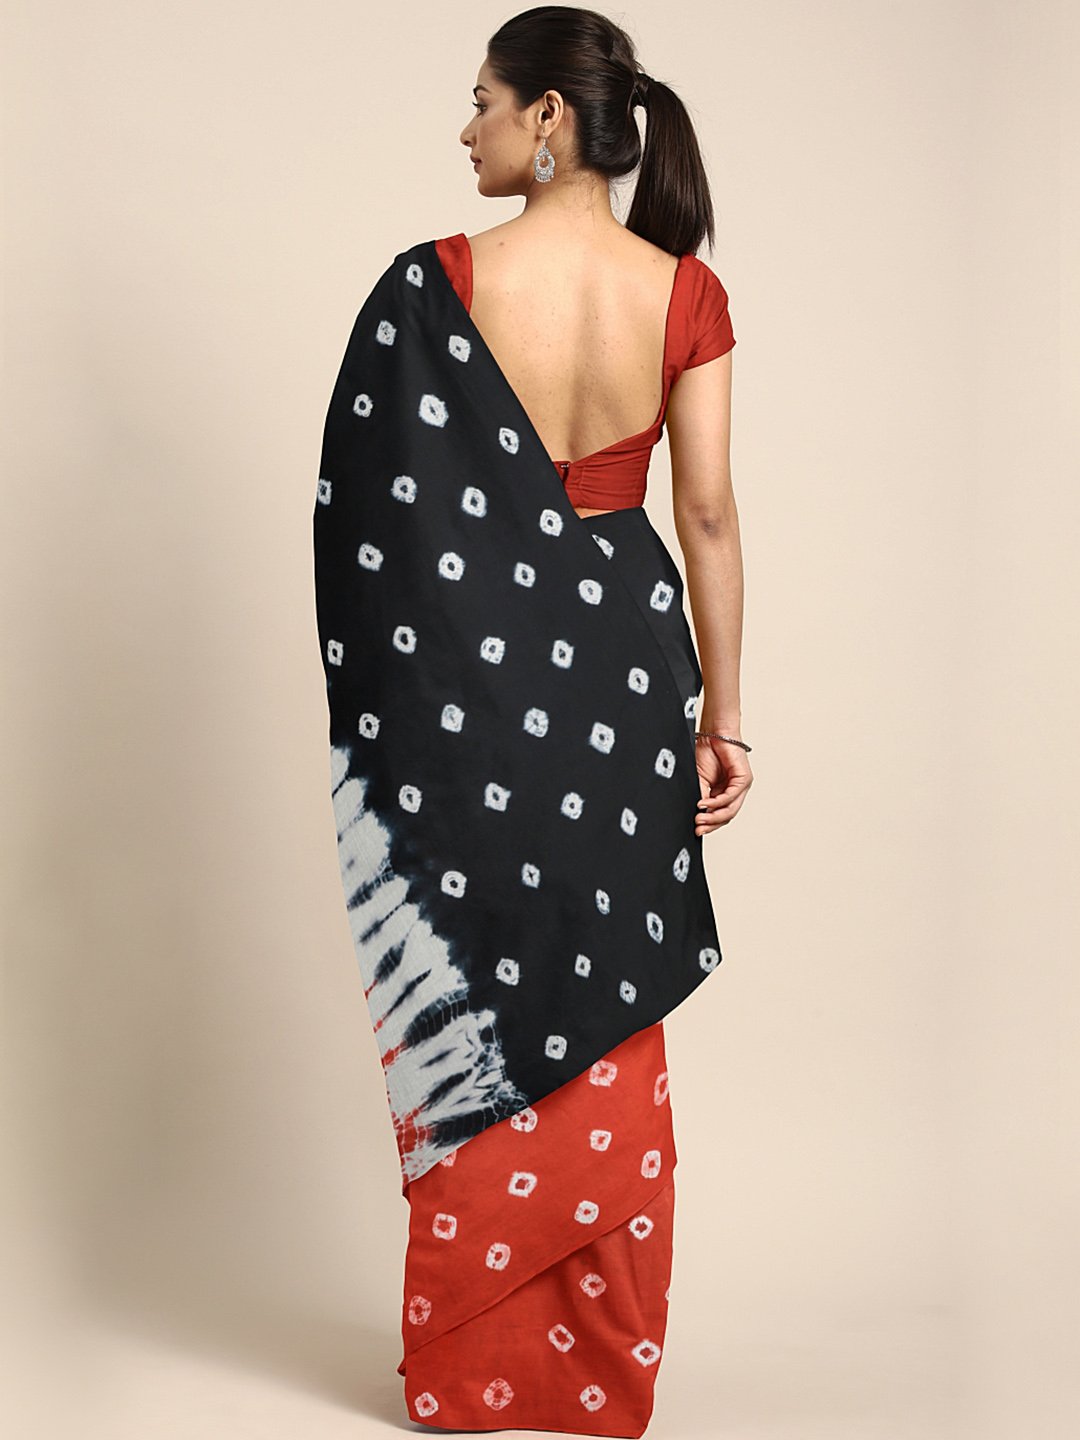 Red & Black Tie & Dyed Handcrafted Cotton Saree-Saree-Kalakari India-BHKPSA0038-Cotton, Dabu, Geographical Indication, Hand Blocks, Hand Crafted, Heritage Prints, Indigo, Natural Dyes, Sarees, Sustainable Fabrics-[Linen,Ethnic,wear,Fashionista,Handloom,Handicraft,Indigo,blockprint,block,print,Cotton,Chanderi,Blue, latest,classy,party,bollywood,trendy,summer,style,traditional,formal,elegant,unique,style,hand,block,print, dabu,booti,gift,present,glamorous,affordable,collectible,Sari,Saree,printed,